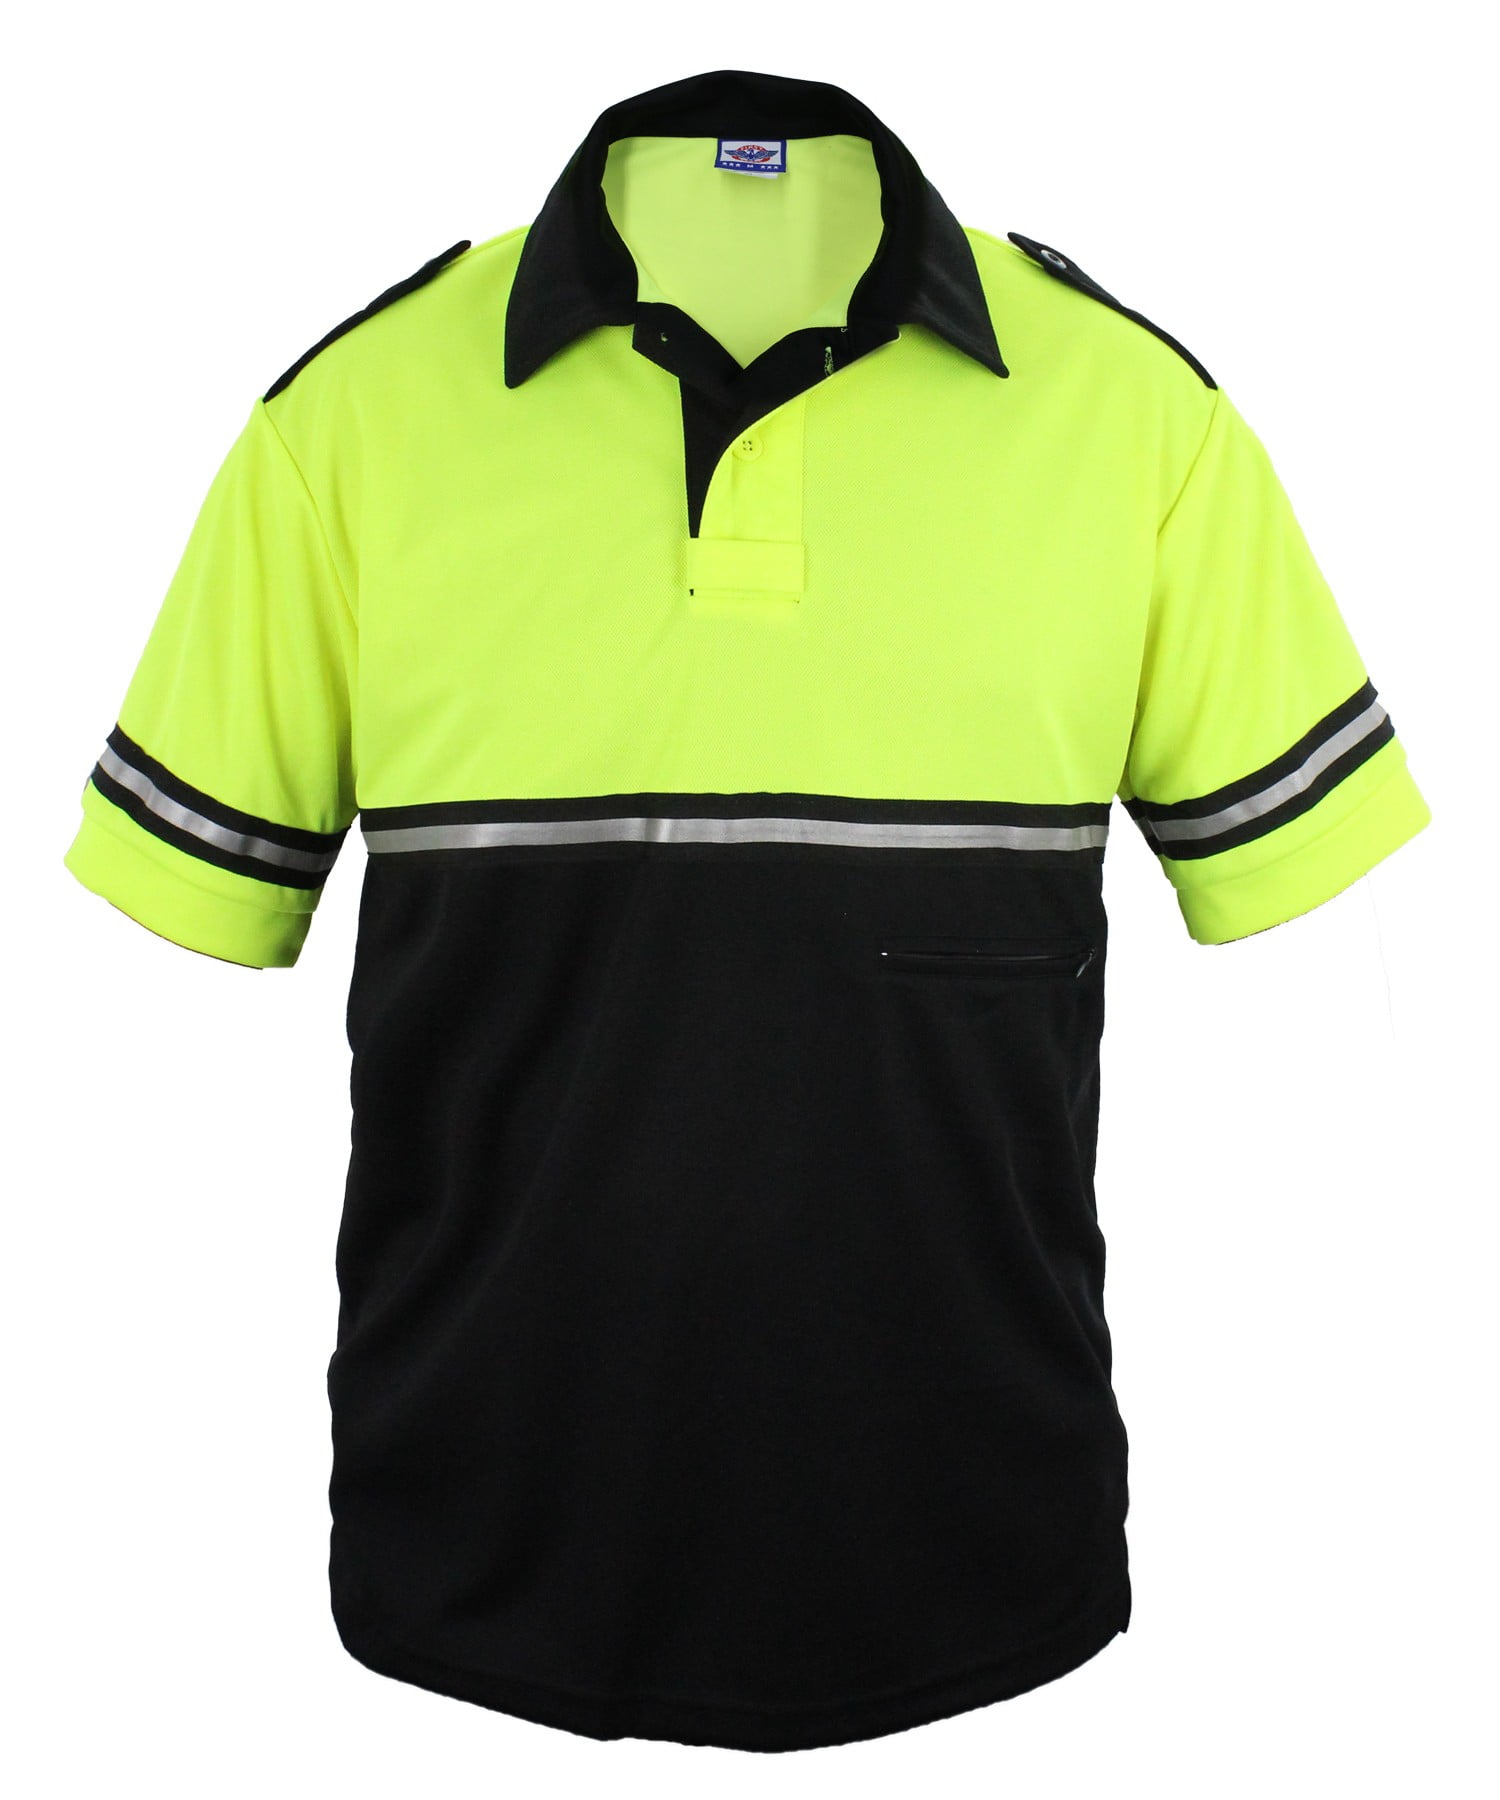 Two Tone Security Bike Patrol Shirt with Reflective Stripes and Zipper Pocket 